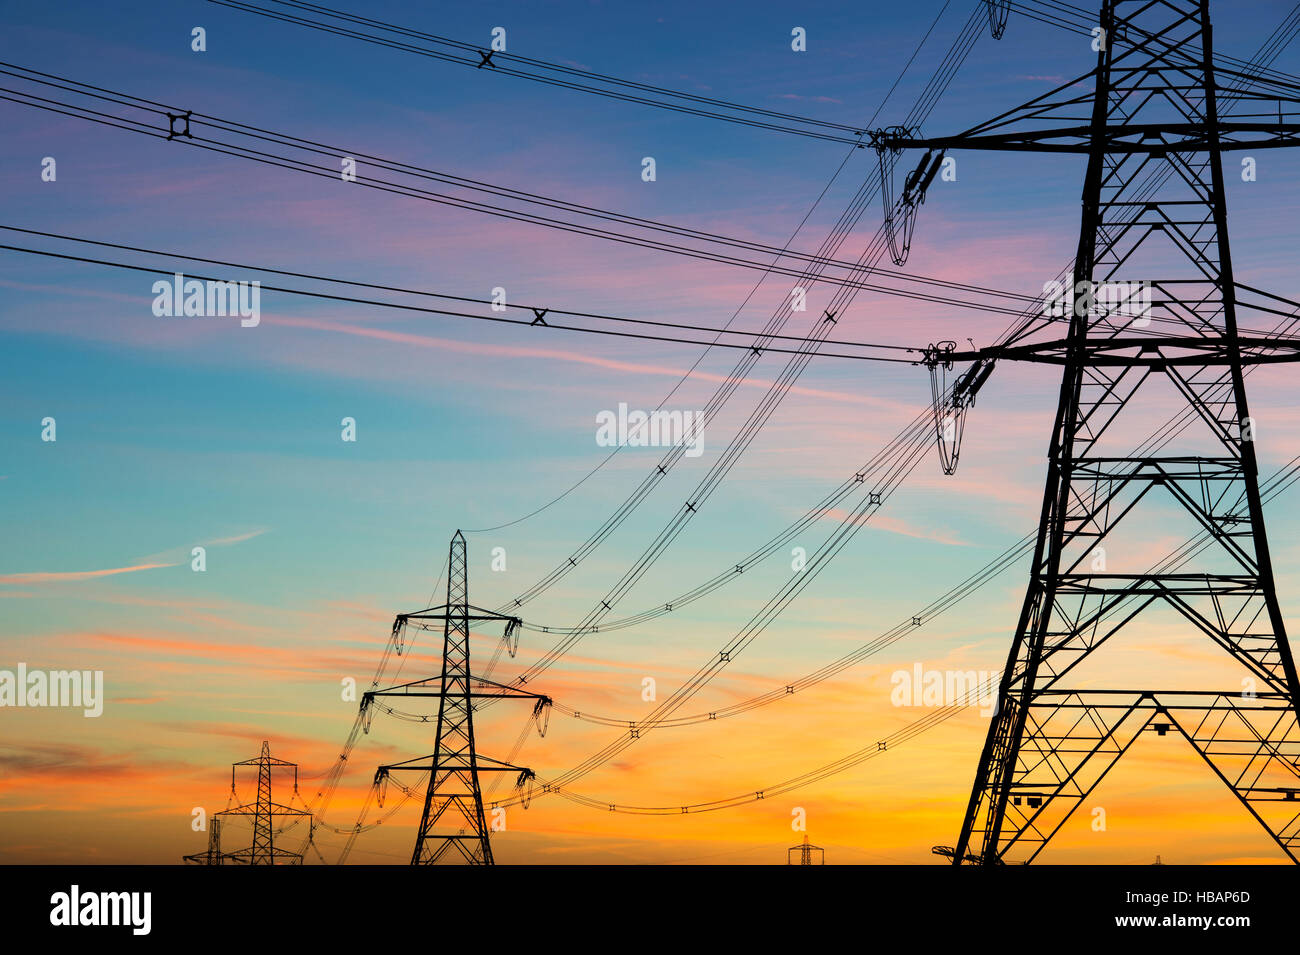 Electricity pylons silhouette against a dawn sky. UK Stock Photo